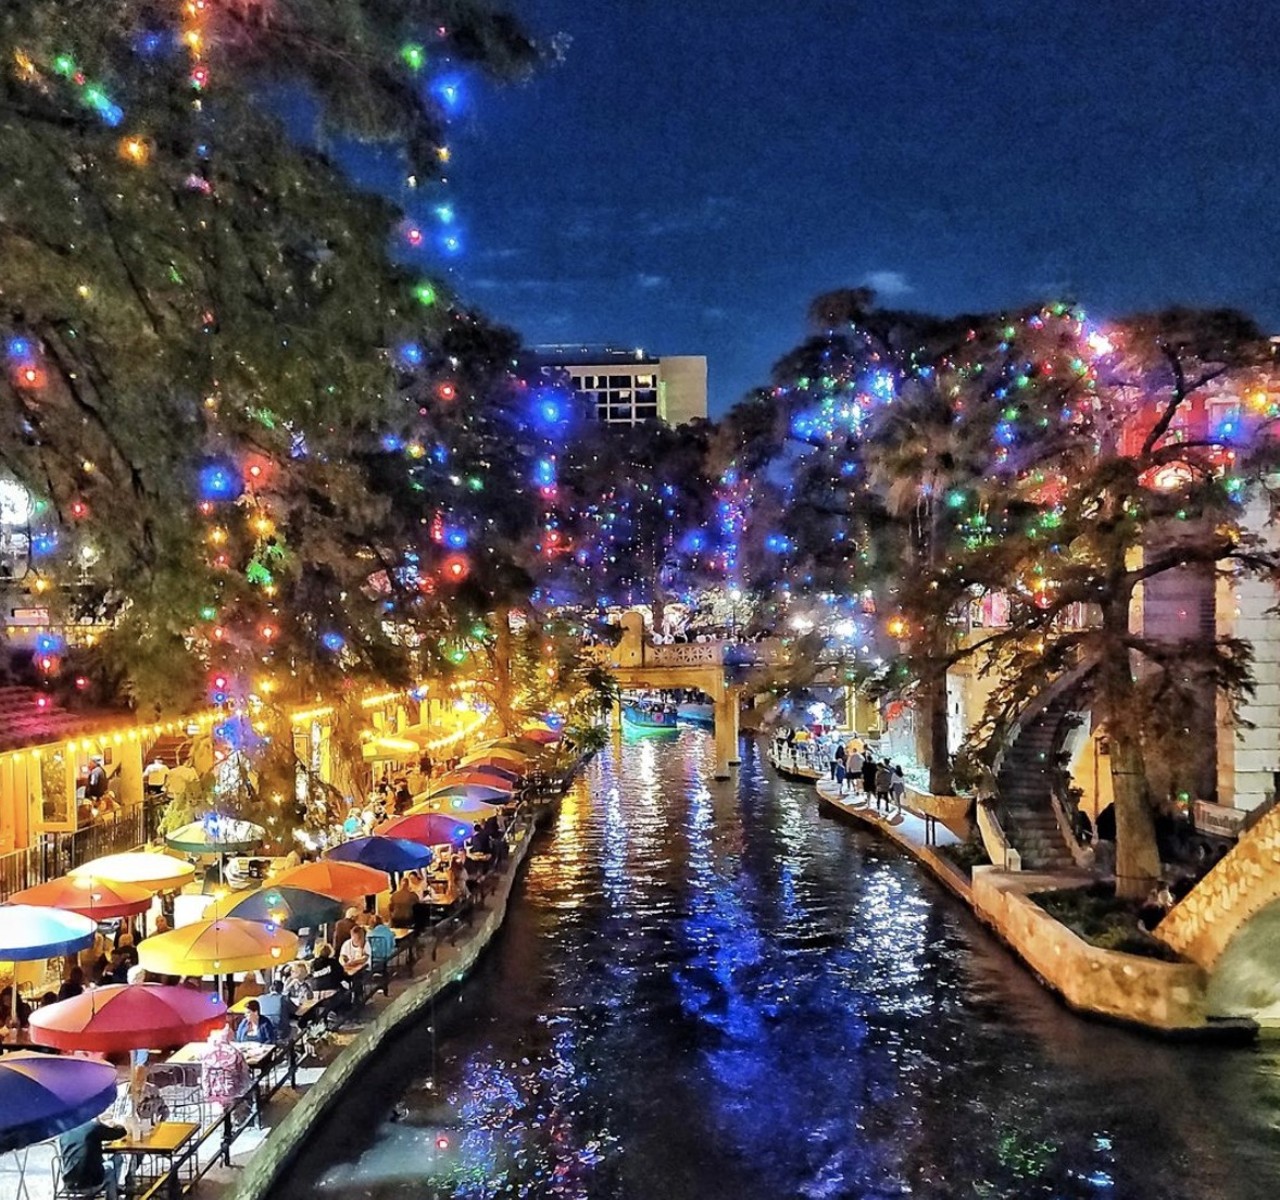 The San Antonio River Walk Is Covered In Christmas Lights